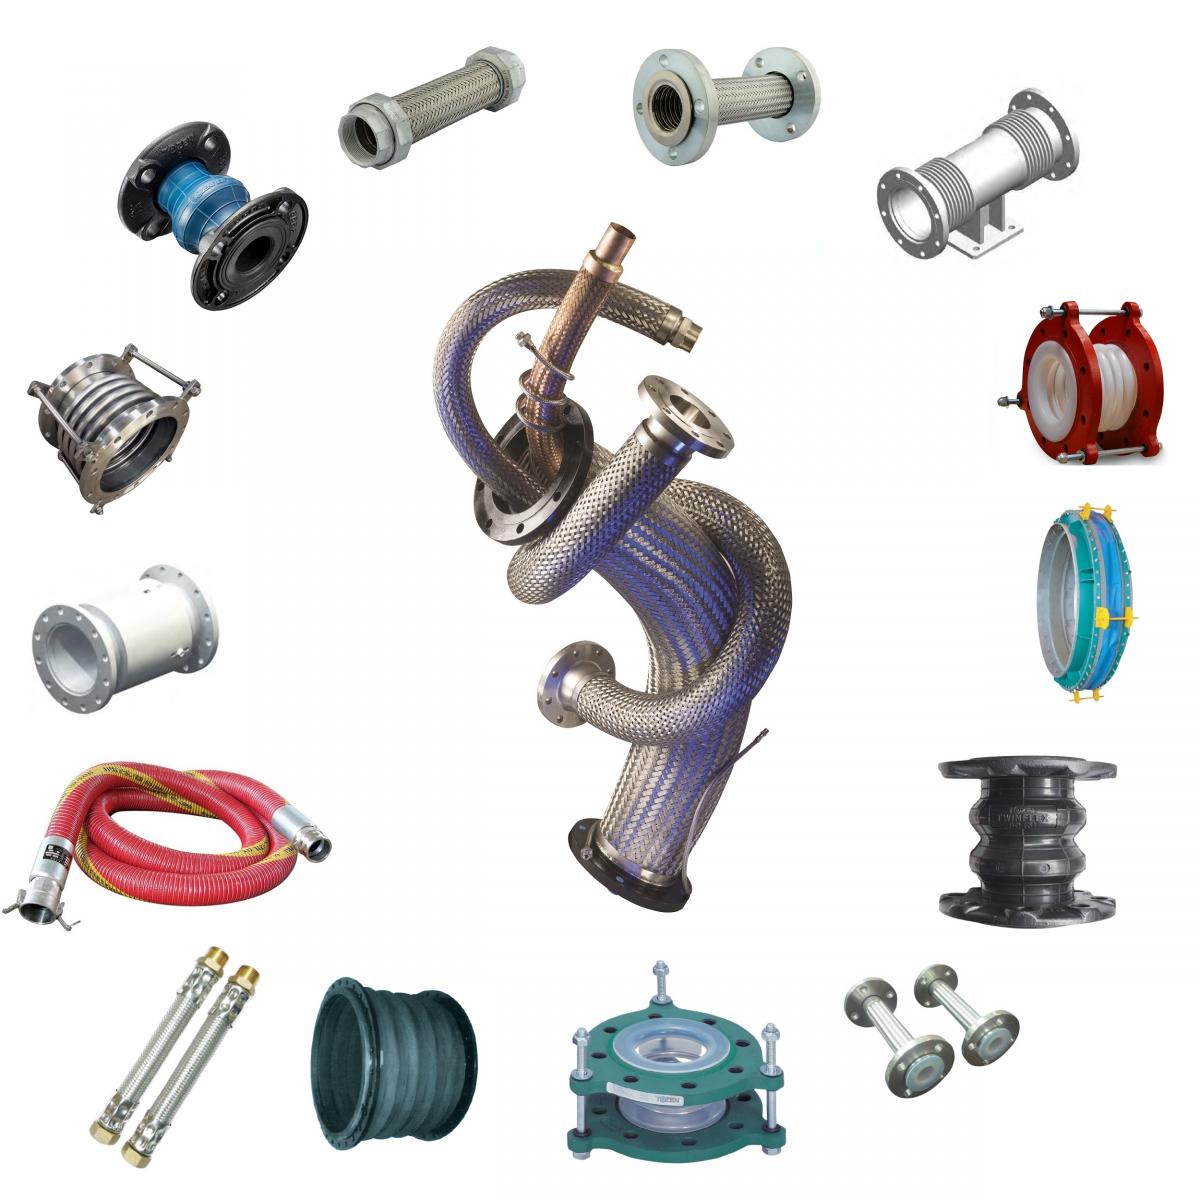 Loading Arm - Couplings and other equipment